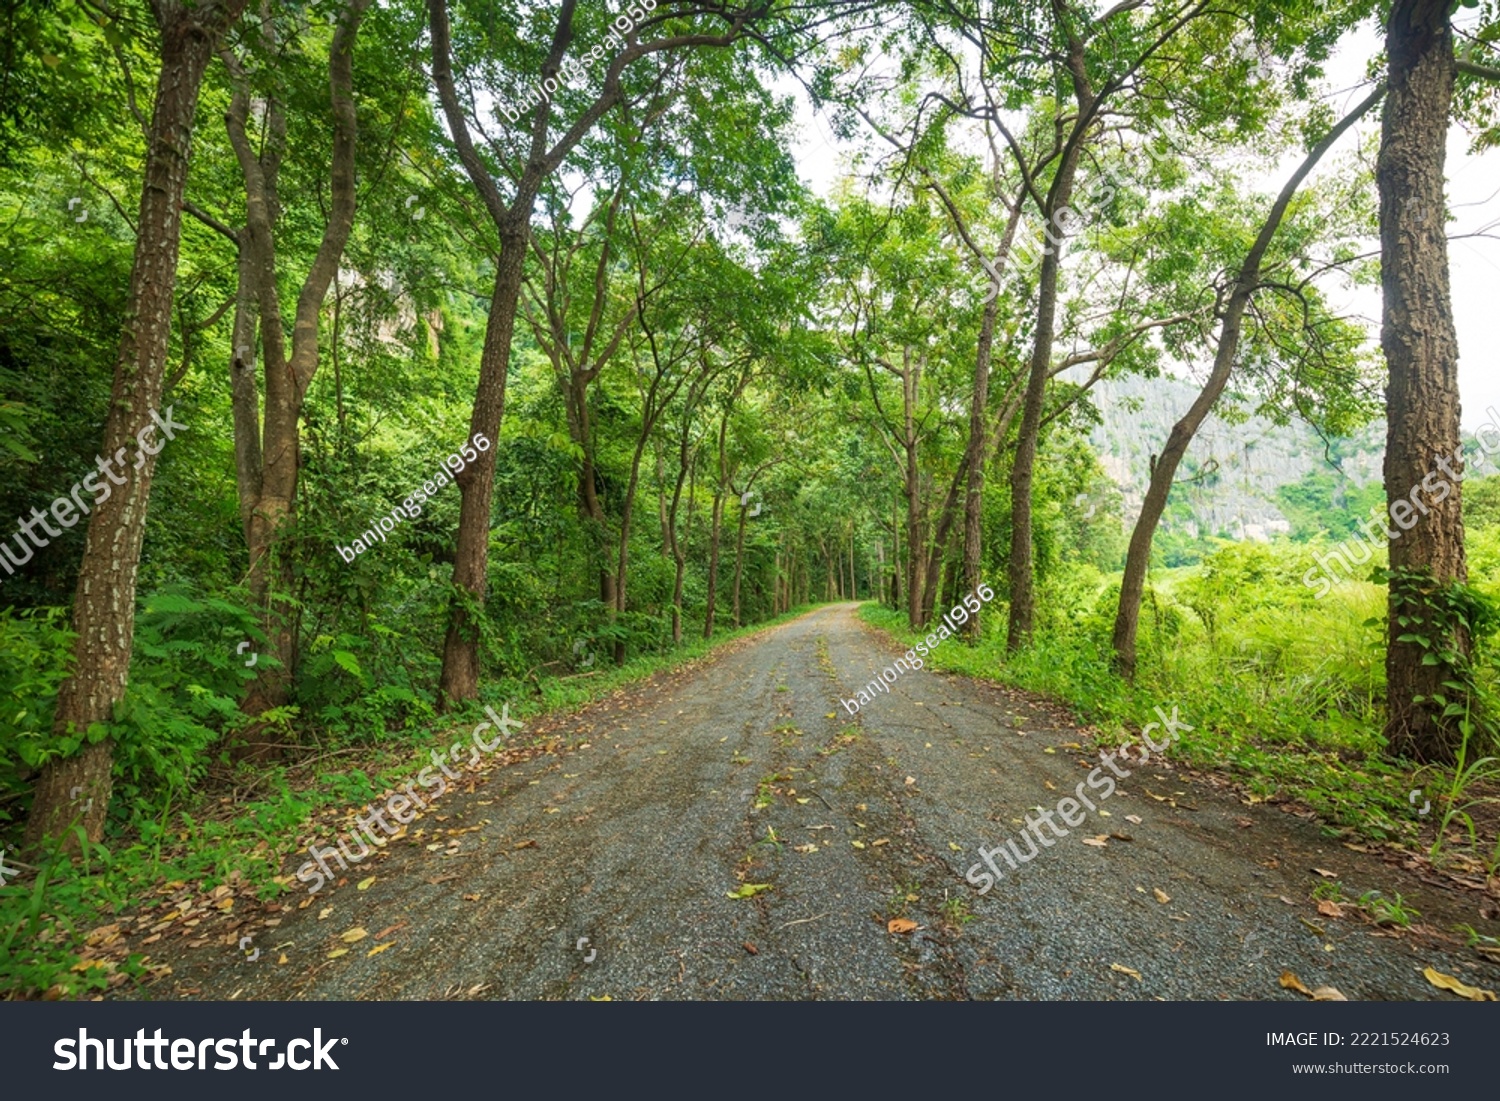 tree tunnel and road,Pathway lane path with green trees in the forest. Beautiful alley in the park. Pathway through the dark forest. #2221524623